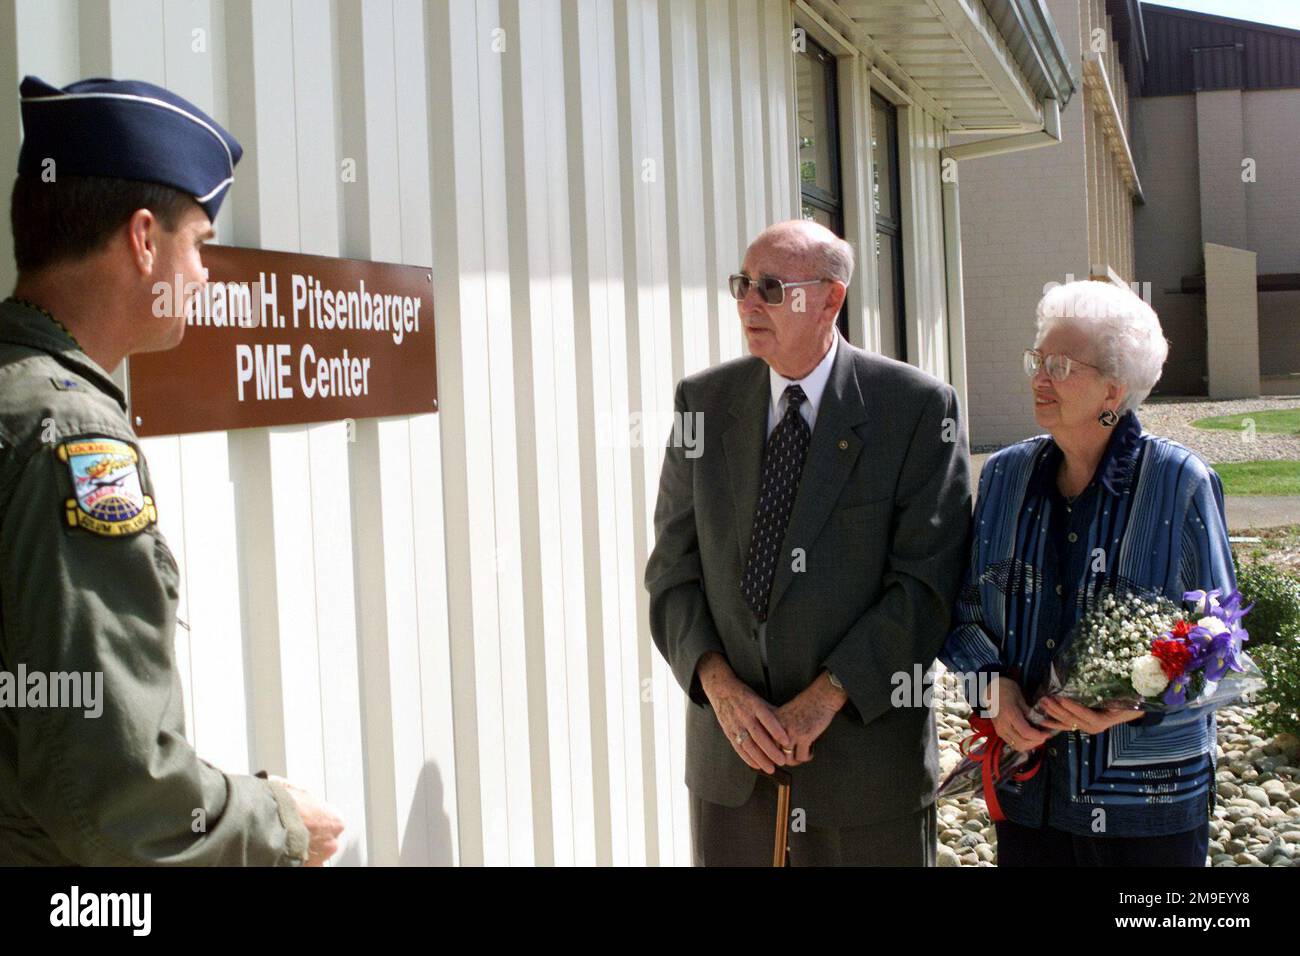 Right side profile medium close-up shot as US Air Force Brigadier General Kevin Chilton, 9th Reconnaissance Wing Commander, Frank Pitsenbarger and his wife Alice look at the newly revealed sign on April 11, 2000 at Beale AFB, California. The sign displays the new name for the Beale's AIRMAN Leadership Schools (William H. Pitsenbarger PME Center). AIRMAN Pitsenbarger was awarded the Air Force Cross, an honor that only 21 airmen have earned, for his sacrifice and bravery. AIRMAN Leadership staff felt that AIRMAN 1ST Class William H. Pitsenbarger was an enlisted role model who displayed a true-li Stock Photo